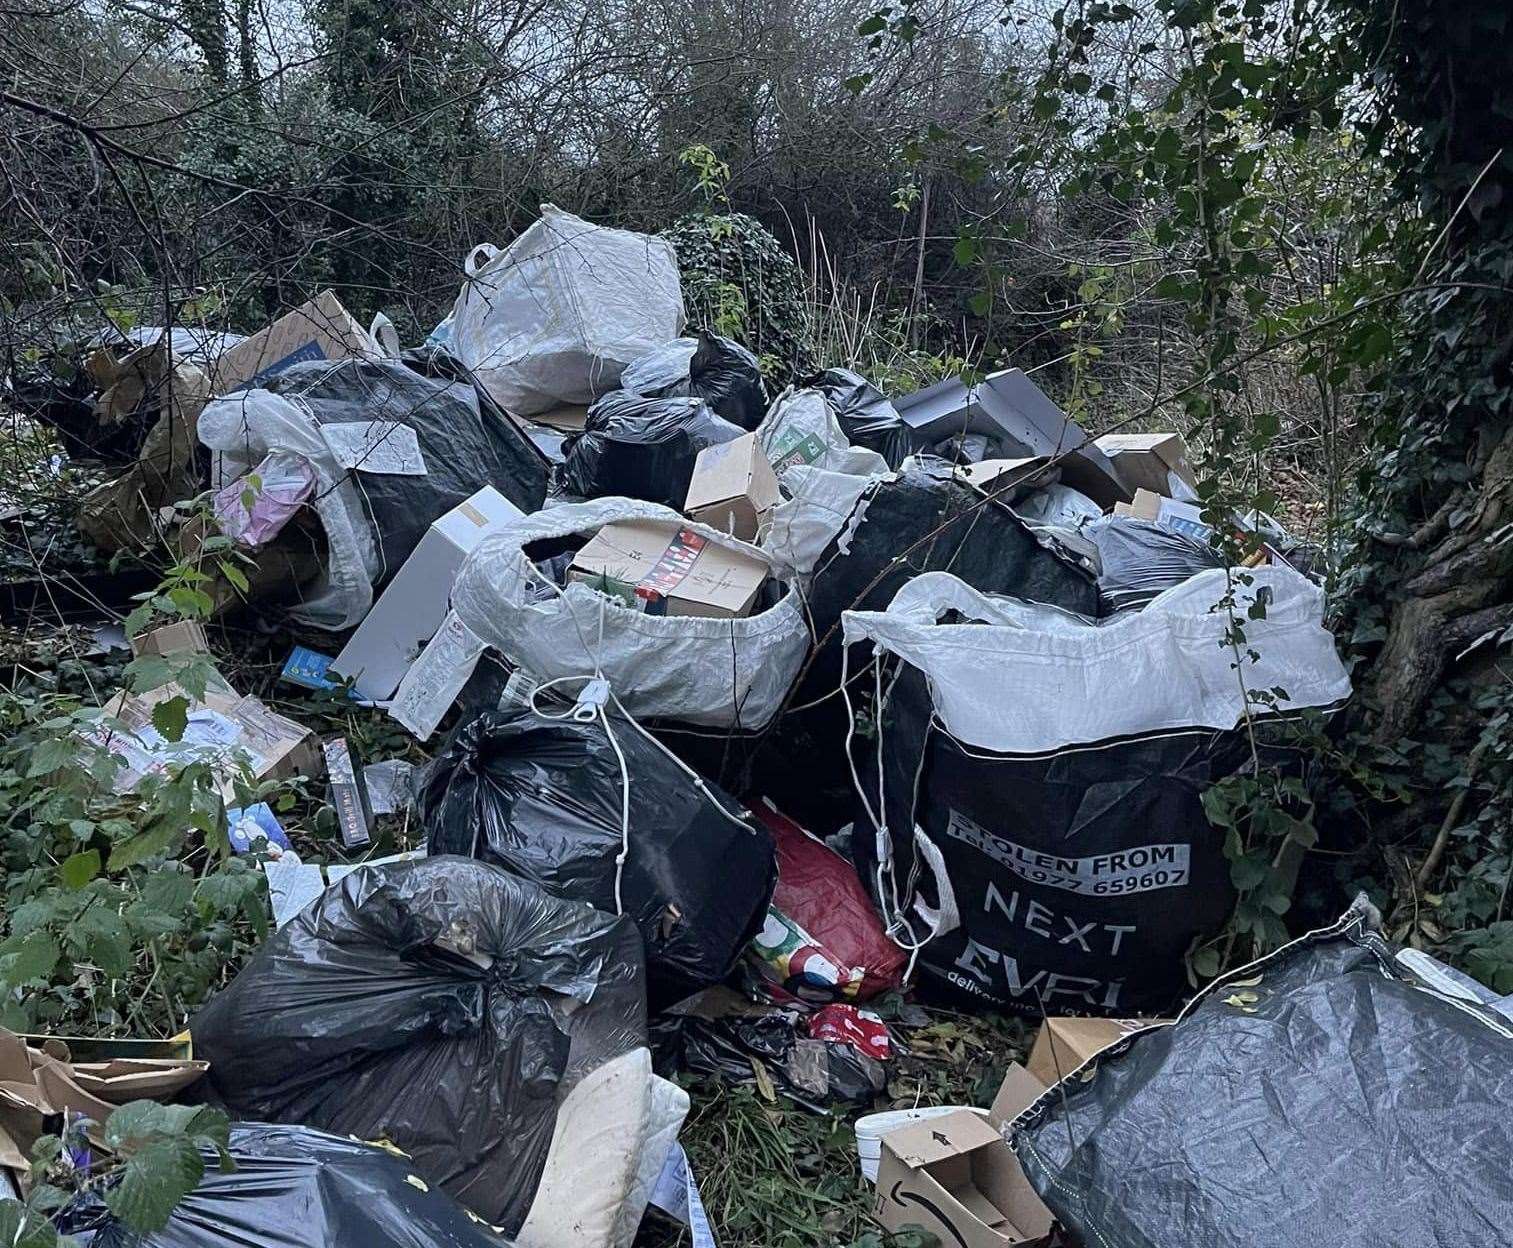 An investigation has been launched after several Evri parcels were found dumped at the end of Beacon Lane, Chatham, last month. Photo: Wayne Coveney